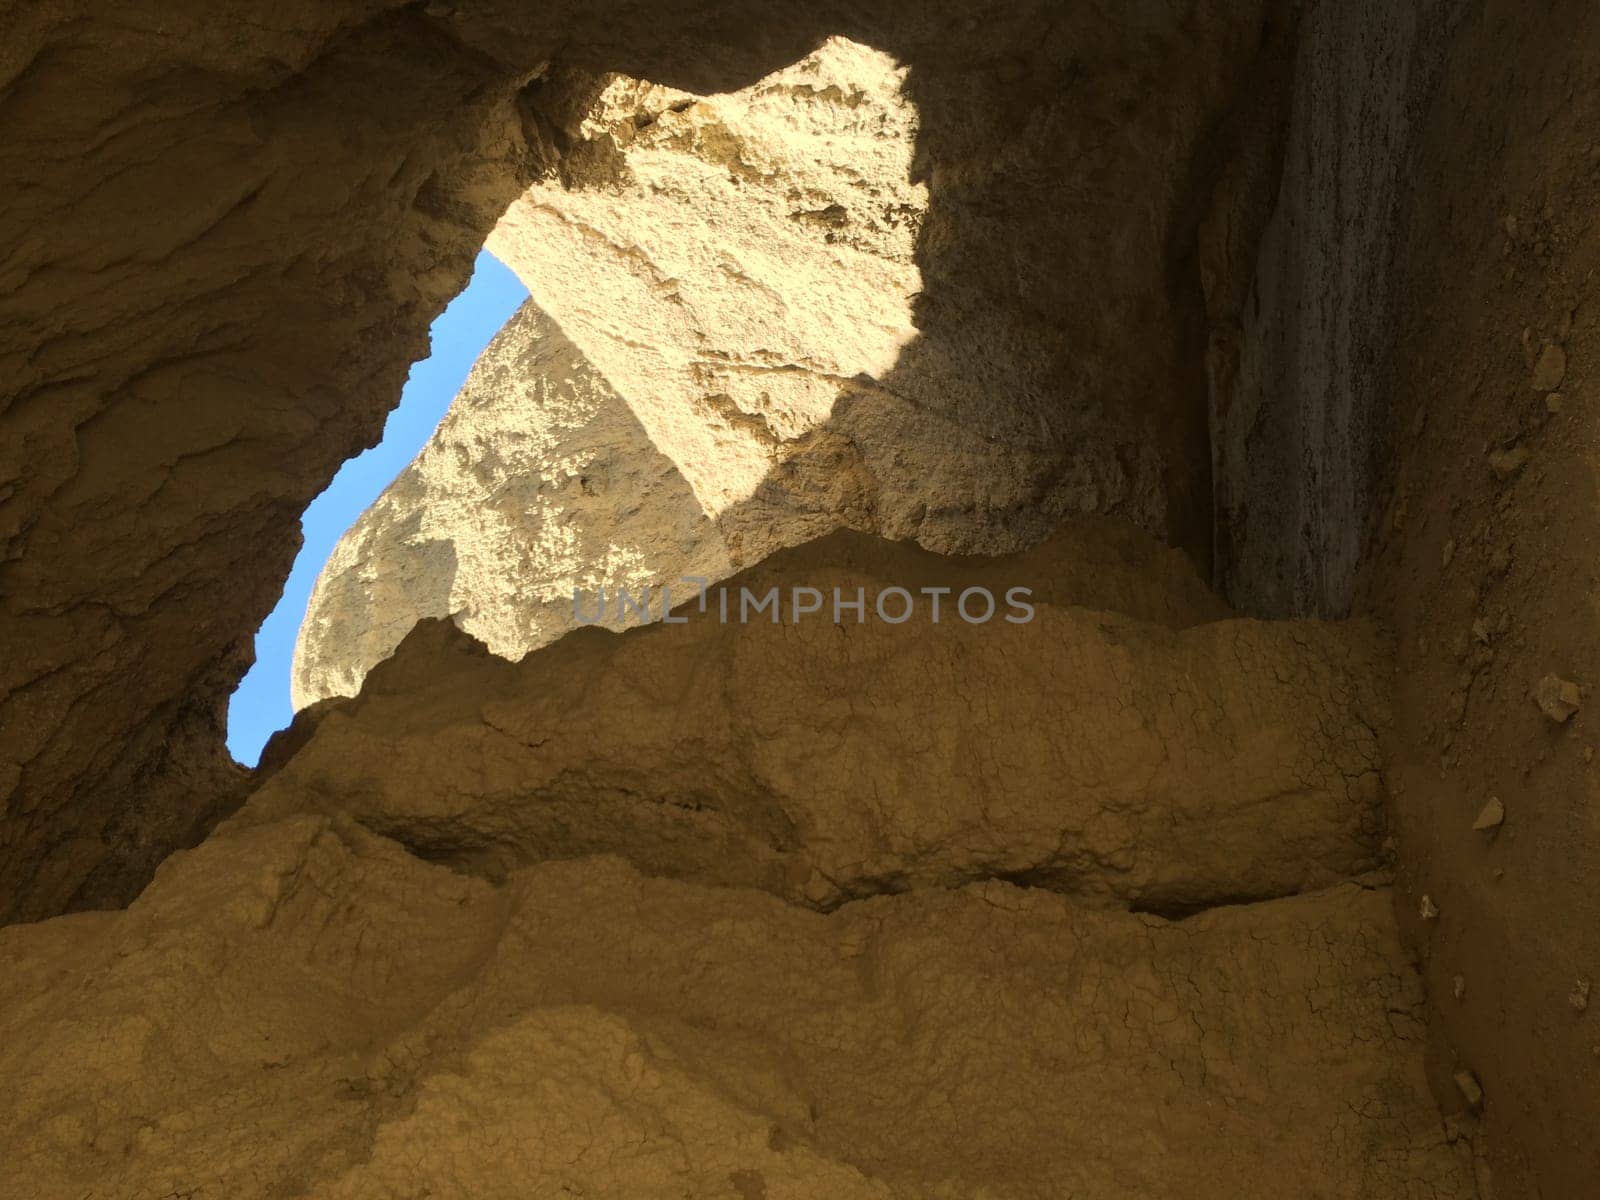 Exploring inside Arroyo Tapiado Mud Caves in Anza Borrego State Park. High quality photo